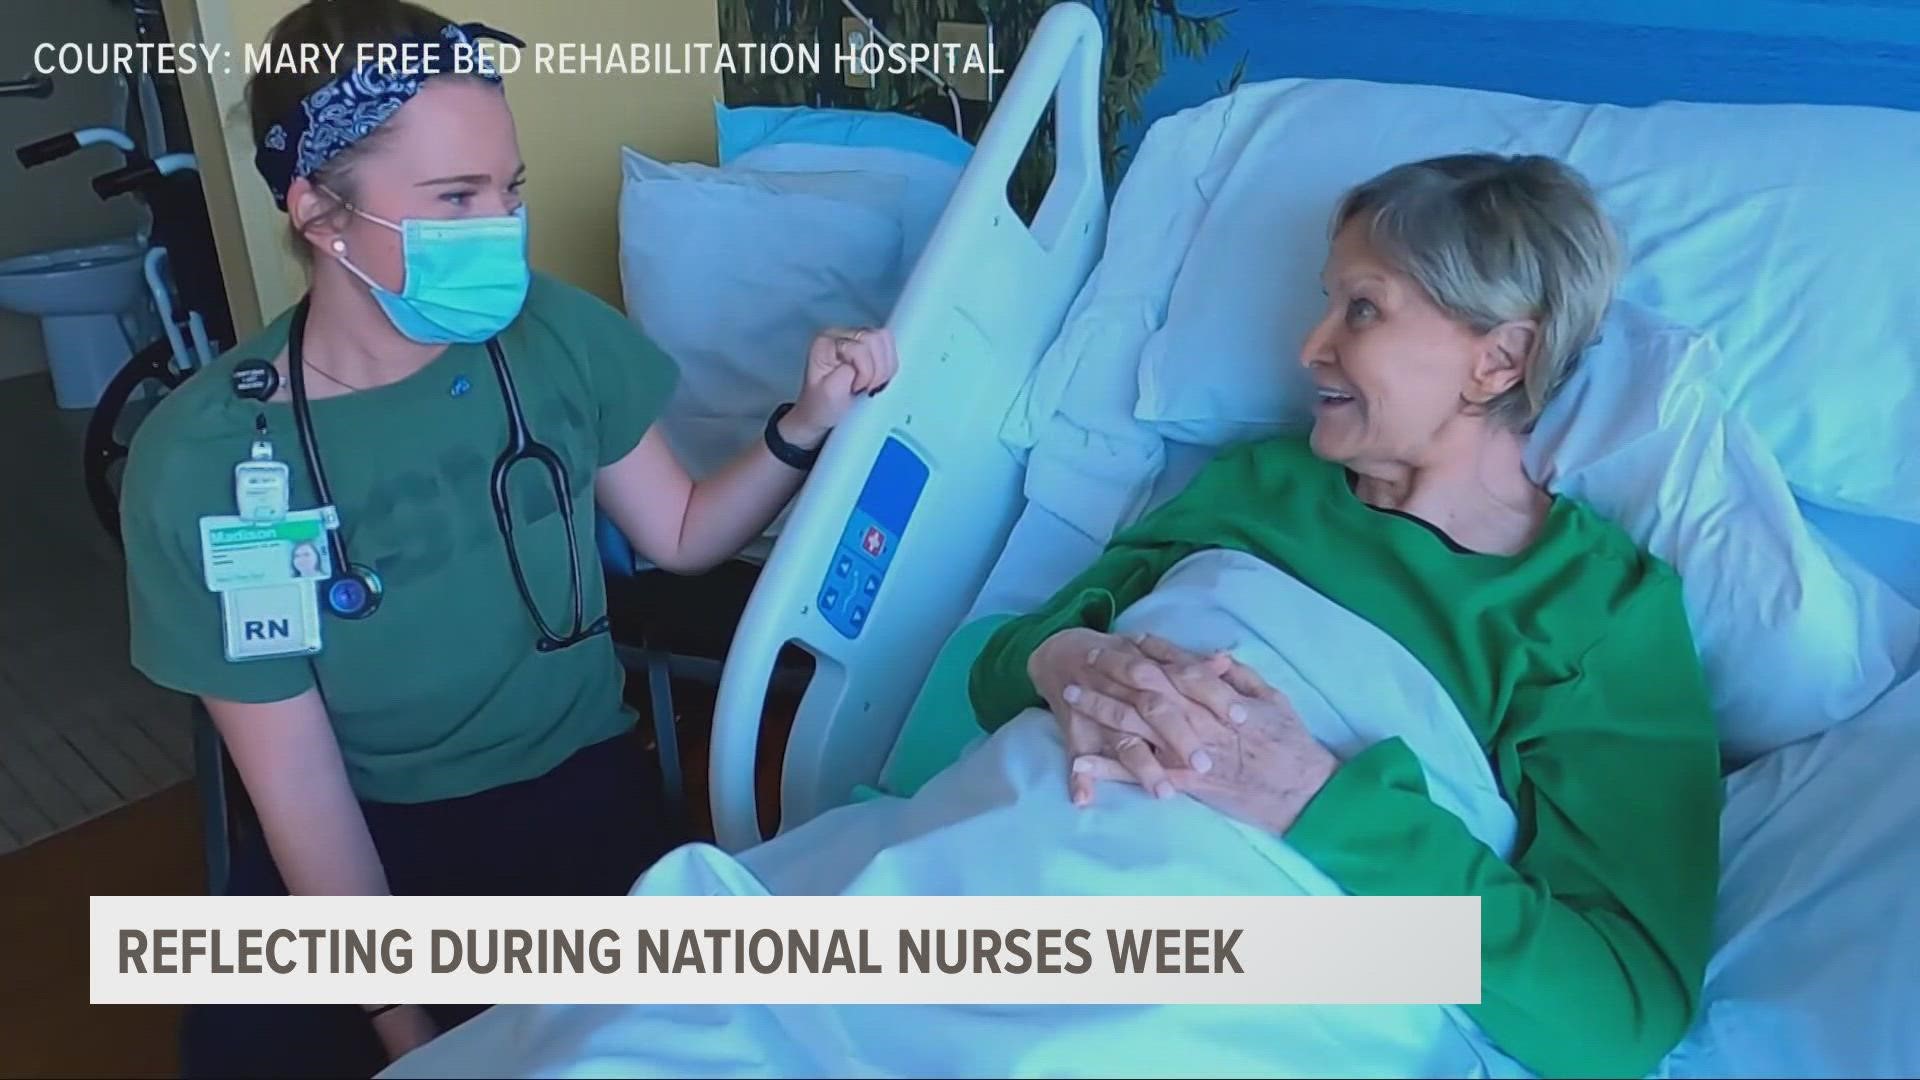 For nurses at Mary Free Bed Rehabilitation Hospital, it's all about their patients.